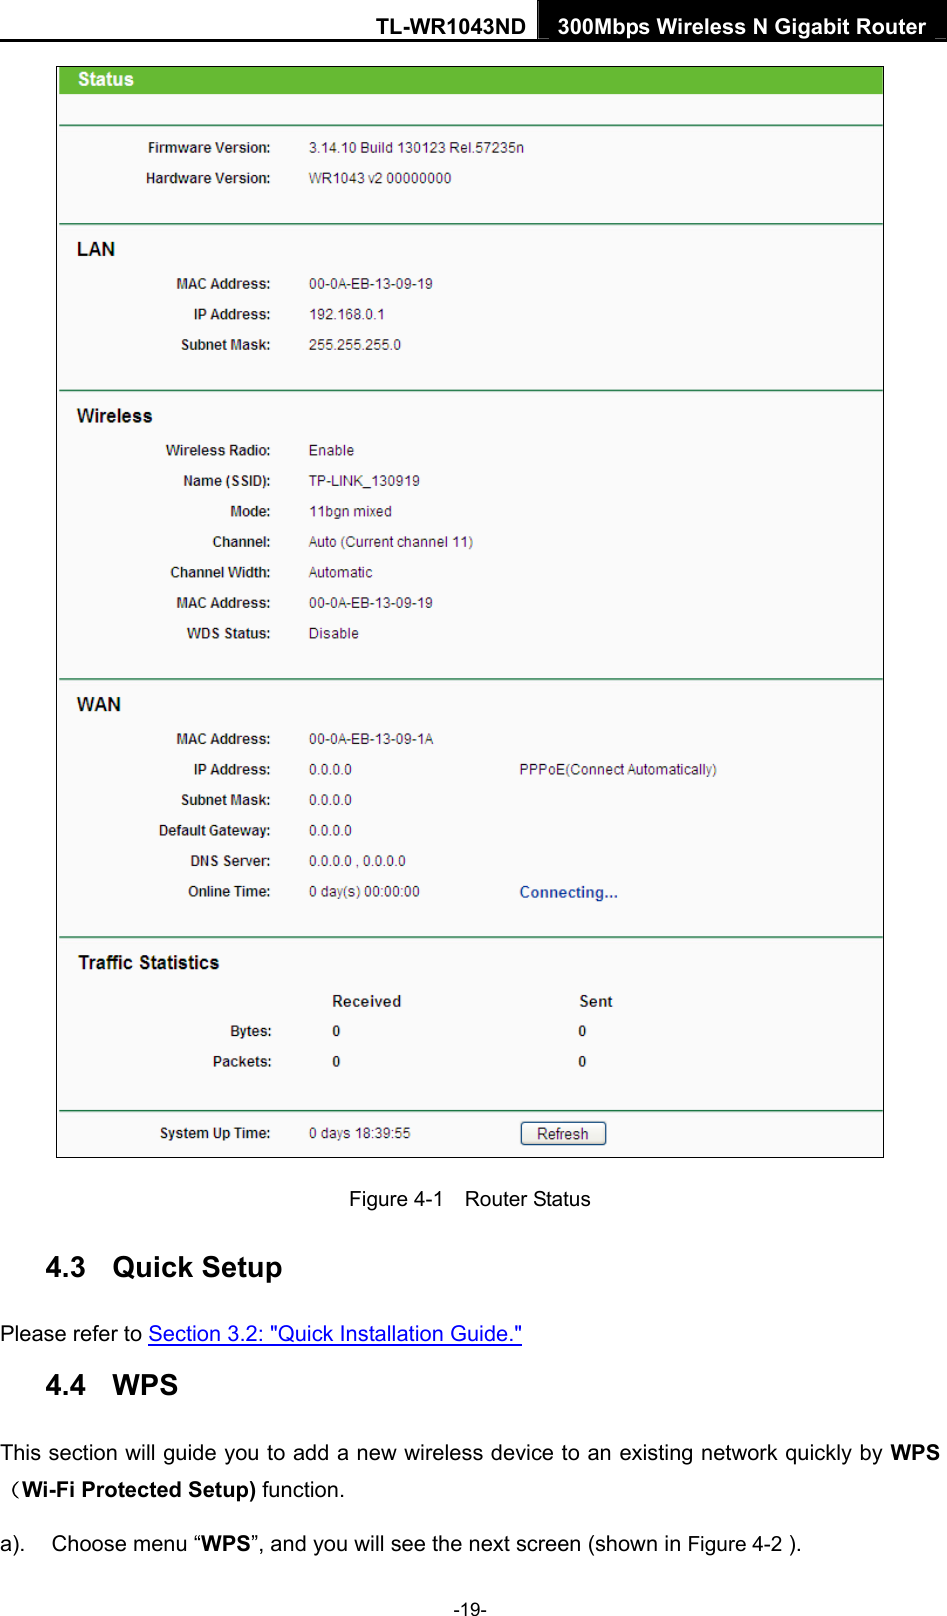 TL-WR1043ND 300Mbps Wireless N Gigabit Router   Figure 4-1    Router Status 4.3  Quick Setup Please refer to Section 3.2: &quot;Quick Installation Guide.&quot; 4.4  WPS This section will guide you to add a new wireless device to an existing network quickly by WPS （Wi-Fi Protected Setup) function.   a).  Choose menu “WPS”, and you will see the next screen (shown in Figure 4-2 ). -19- 